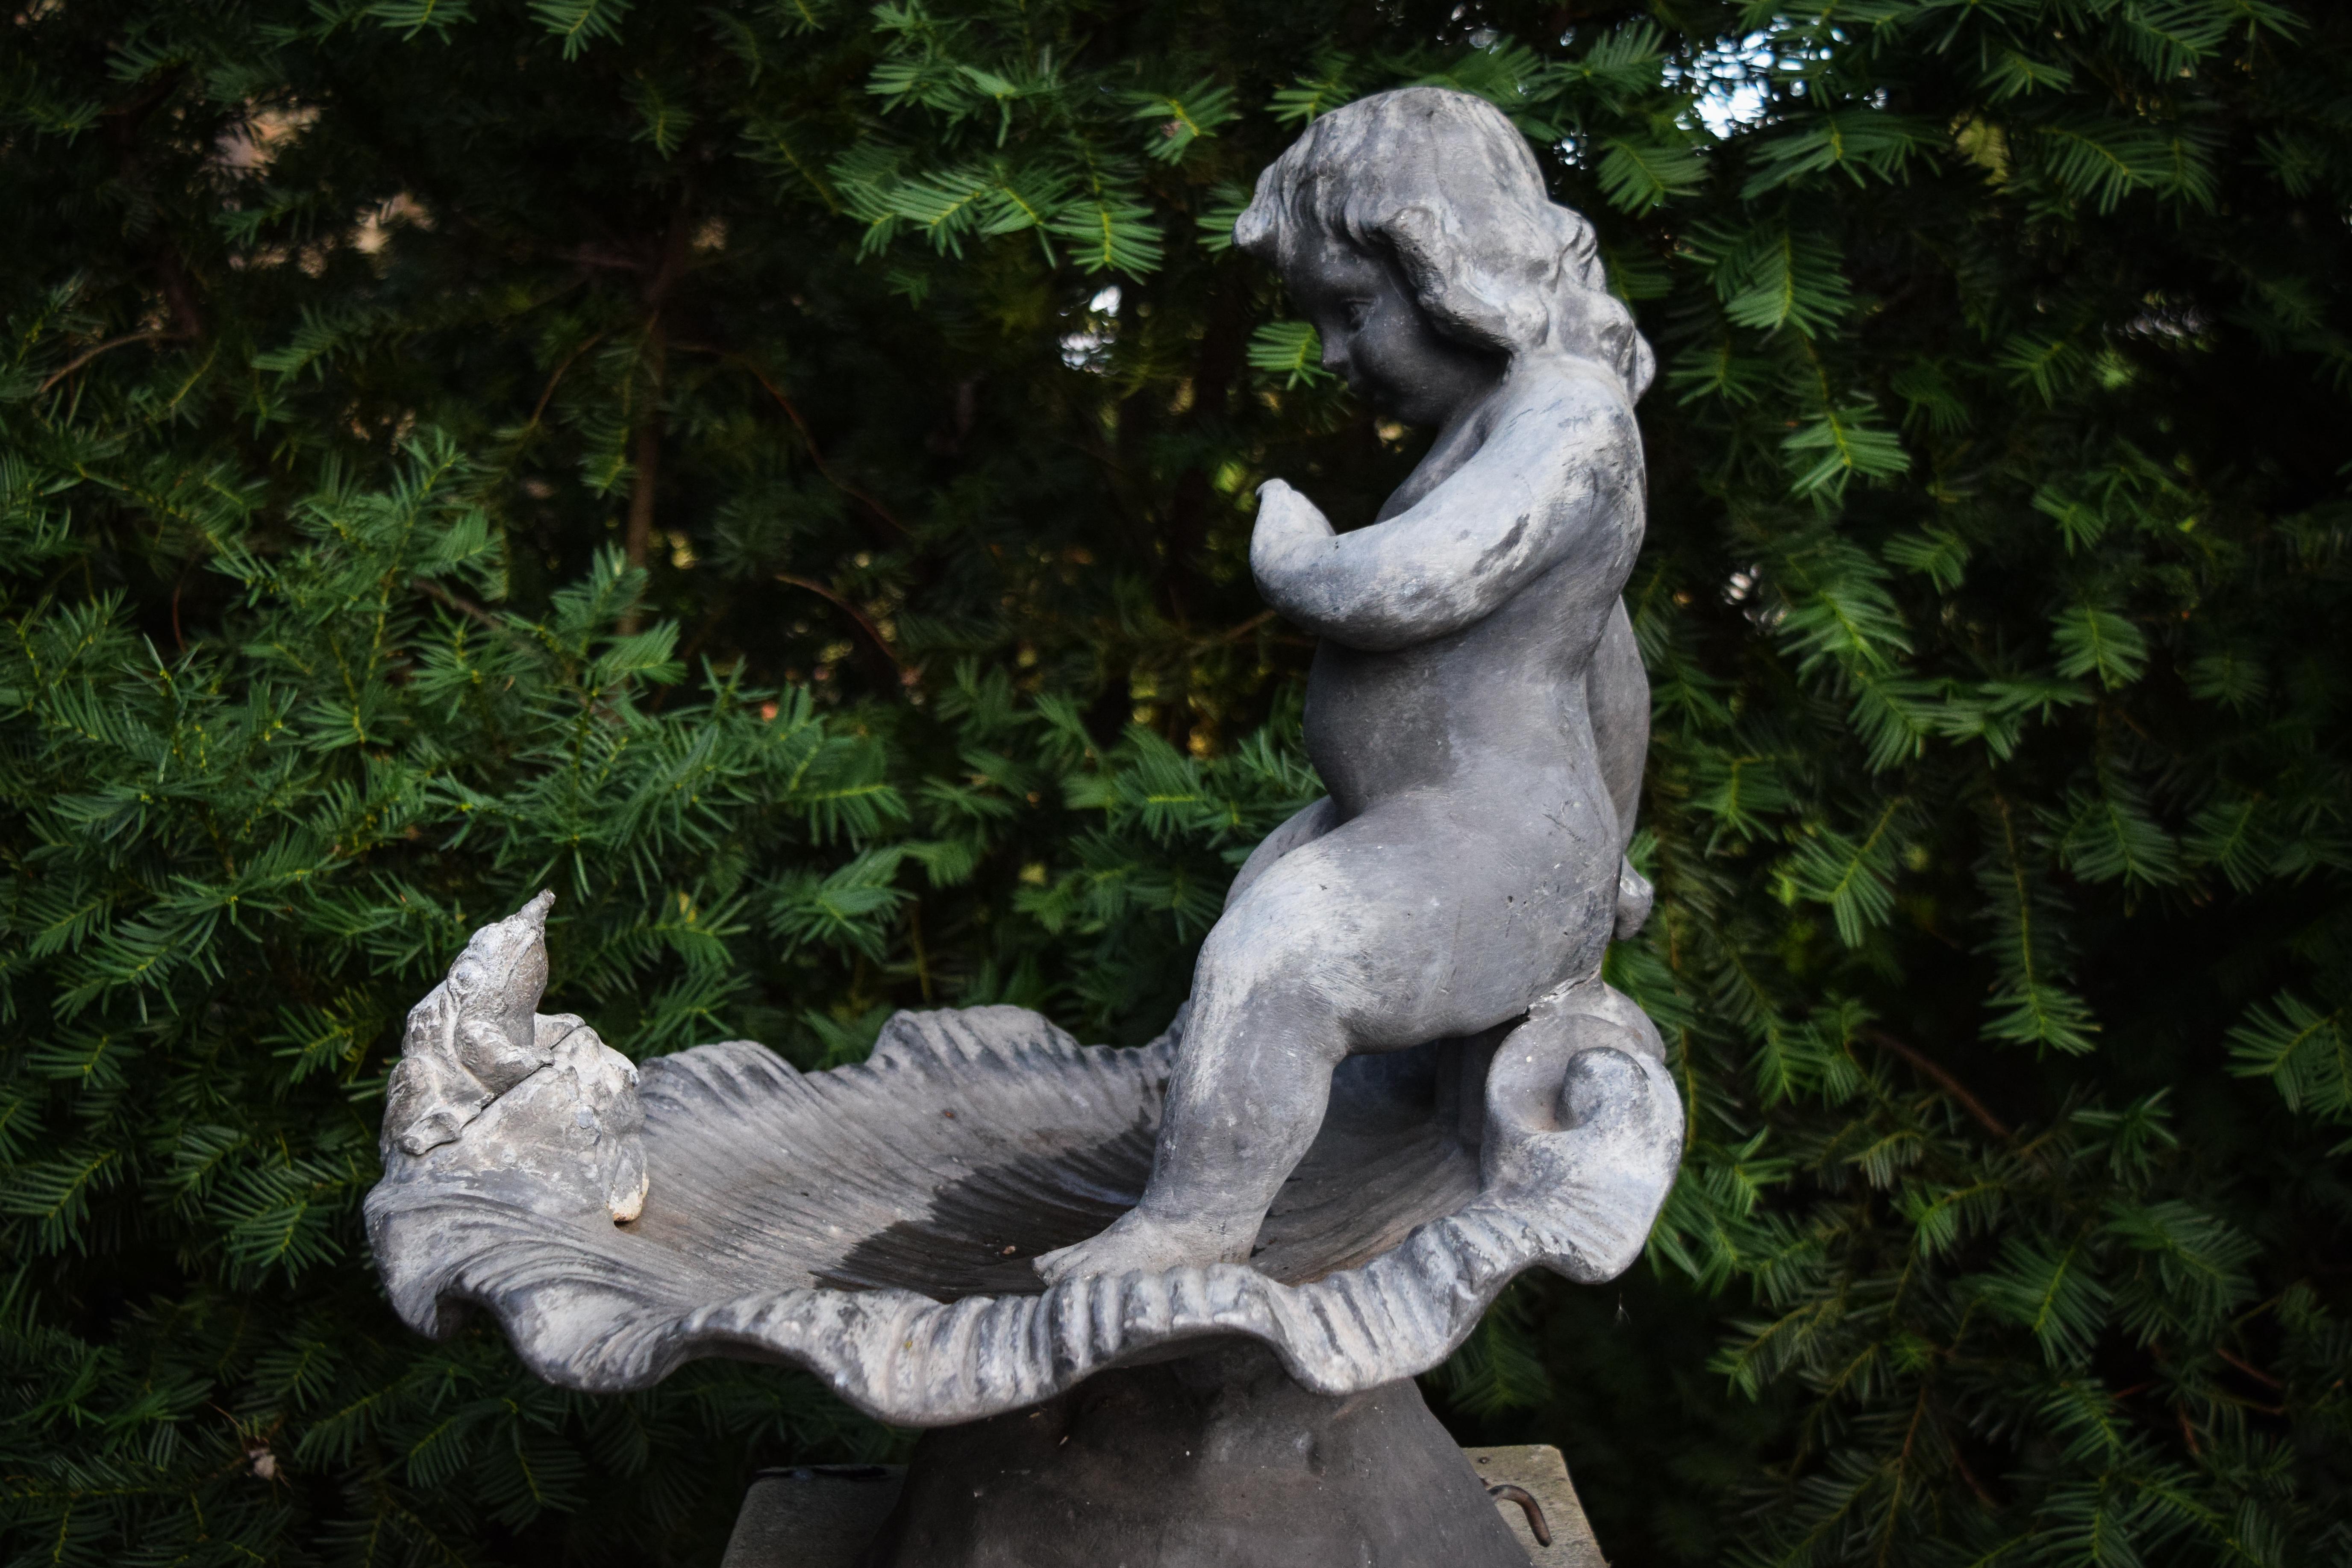 English lead offers a sophistication to any gardenscape or terrace. This whimsical vintage fountain is a classical scene featuring a playful frog and child. This fully functional fountain will stay perpetually youthful for decades to come.